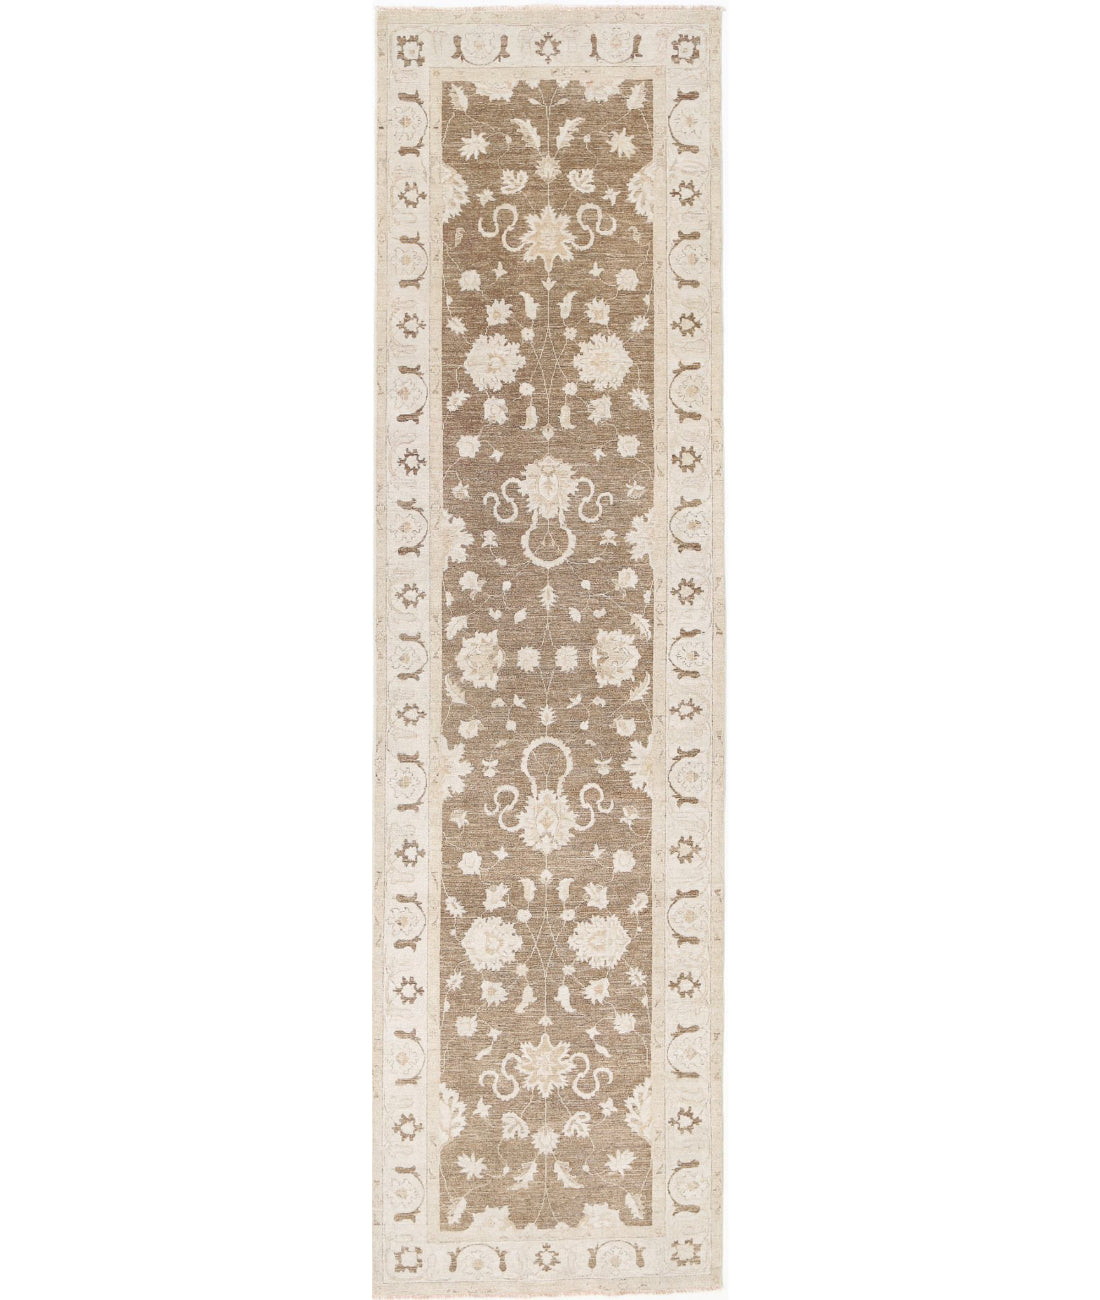 Hand Knotted Serenity Wool Rug - 3&#39;9&#39;&#39; x 13&#39;10&#39;&#39; 3&#39;9&#39;&#39; x 13&#39;10&#39;&#39; (113 X 415) / Brown / Ivory